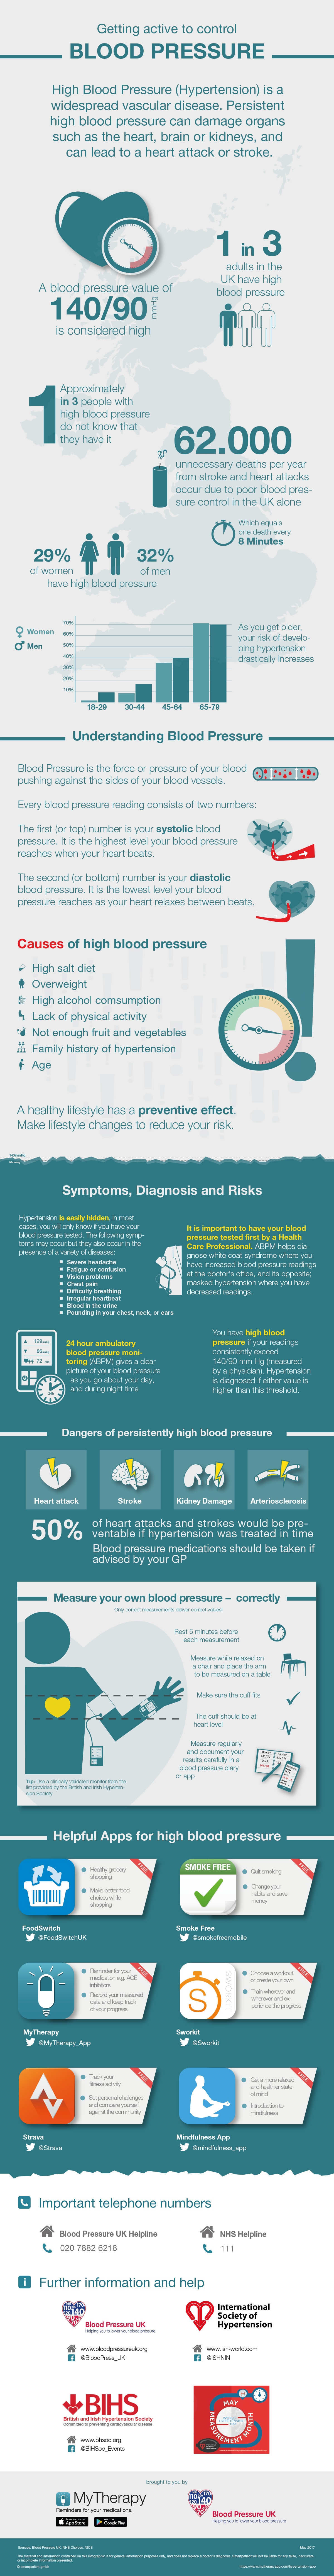 Protect yourself from heart attacks and stroke, get your blood pressure checked by your GP